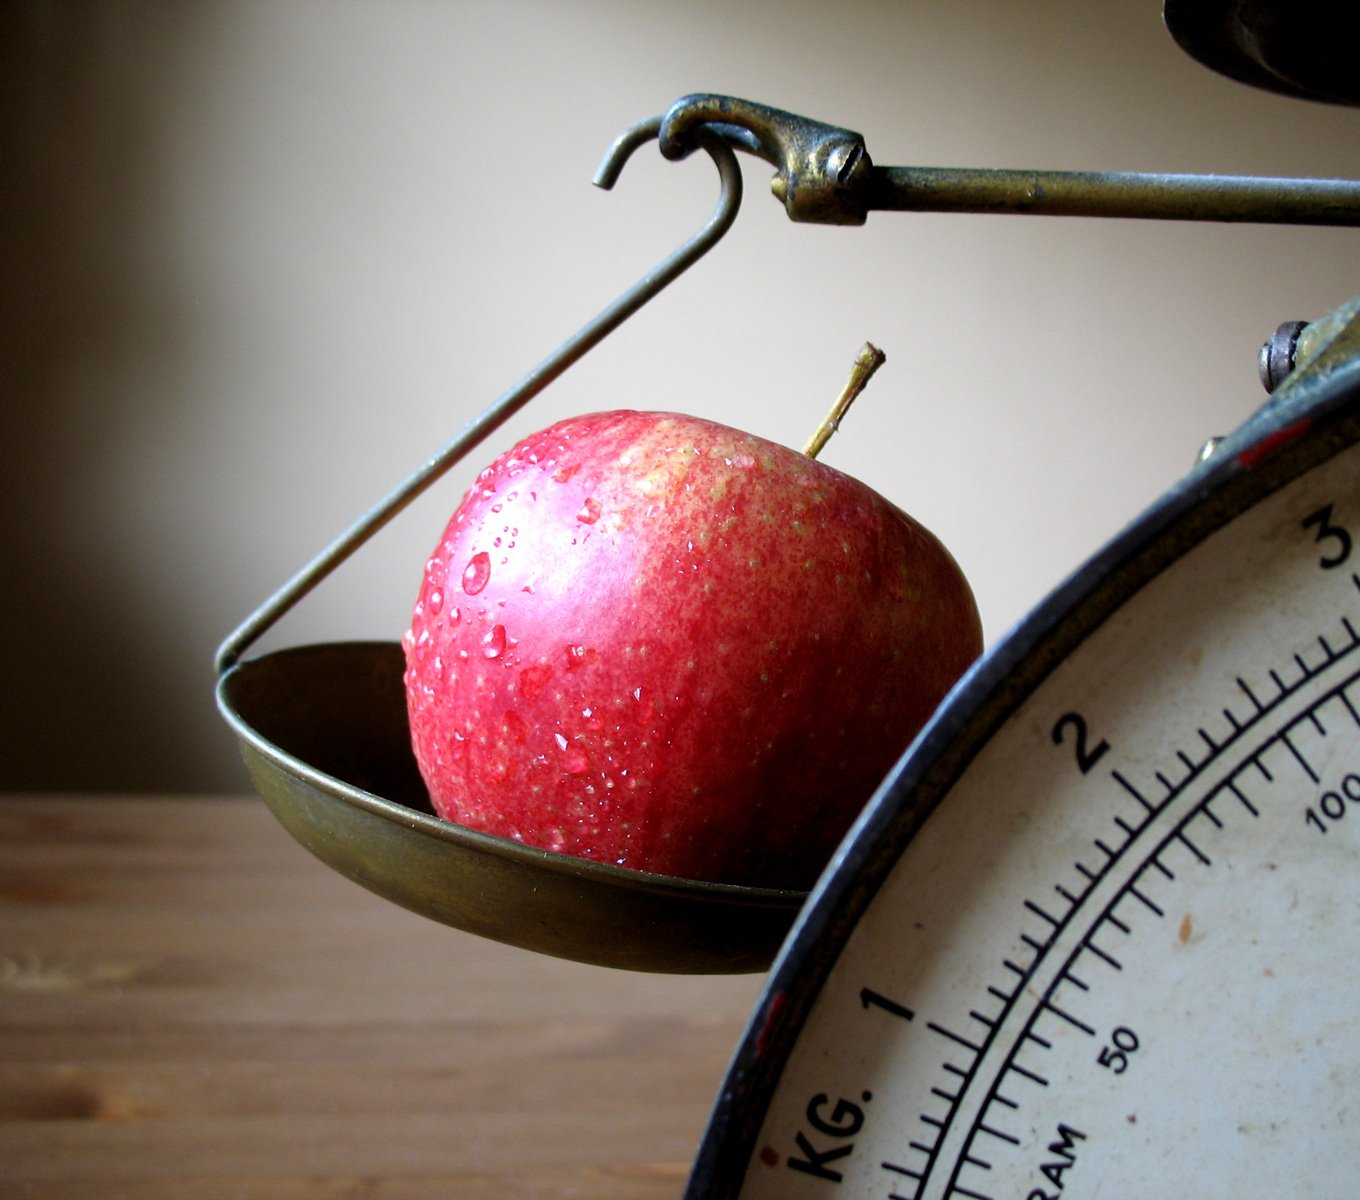 Apple and scale